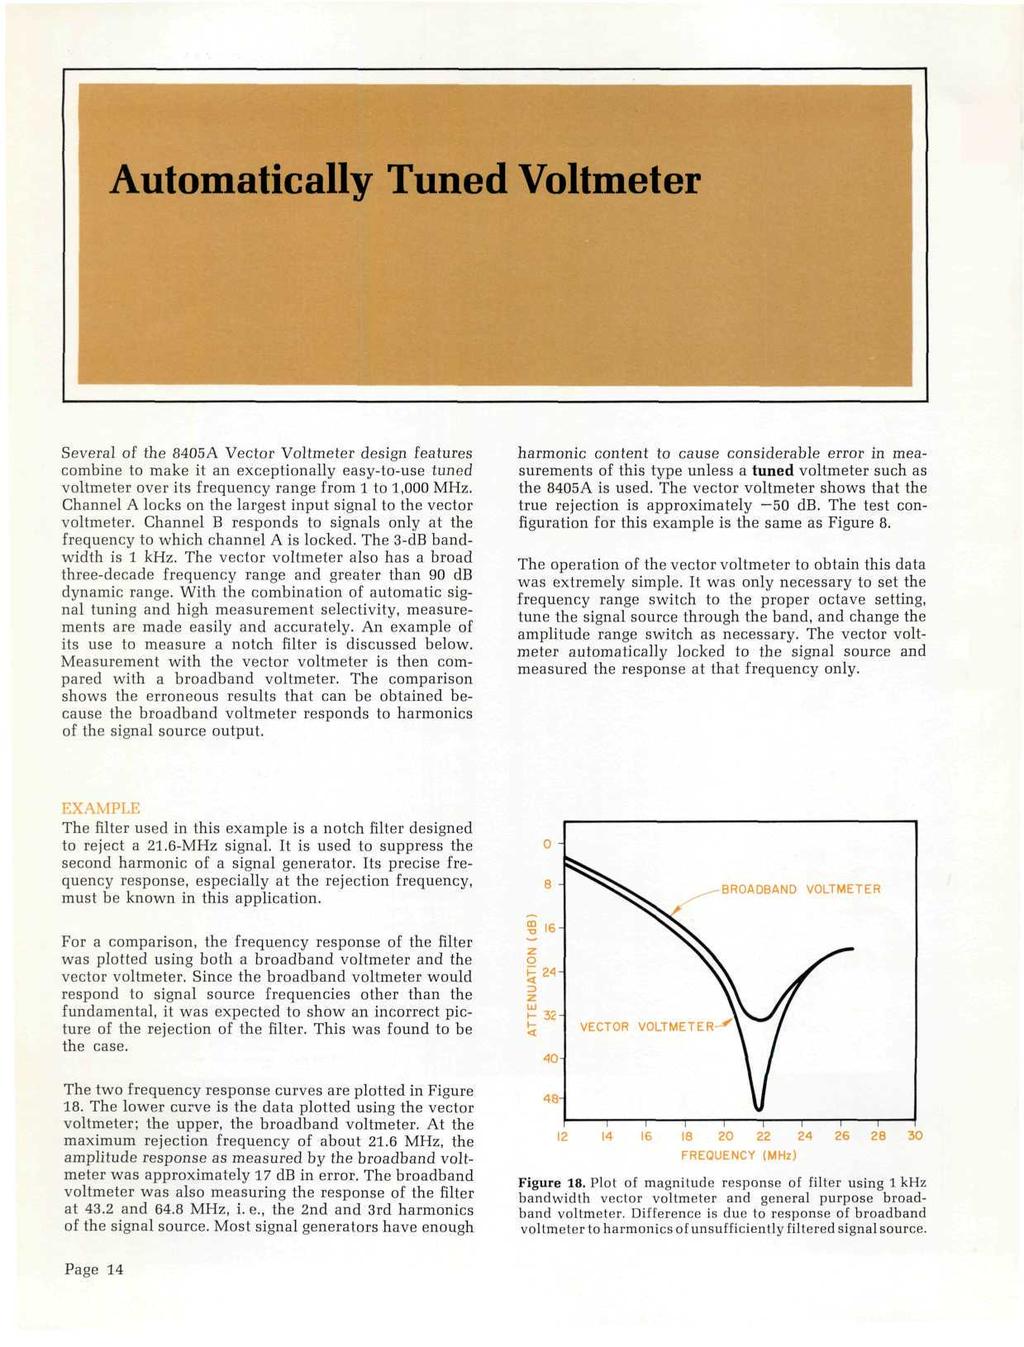 Automatically Tuned Voltmeter Several of the 8405A Vector Voltmeter design features combine to make it an exceptionally easy-to-use tuned voltmeter over its frequency range from 1 to 1,000 MHz.